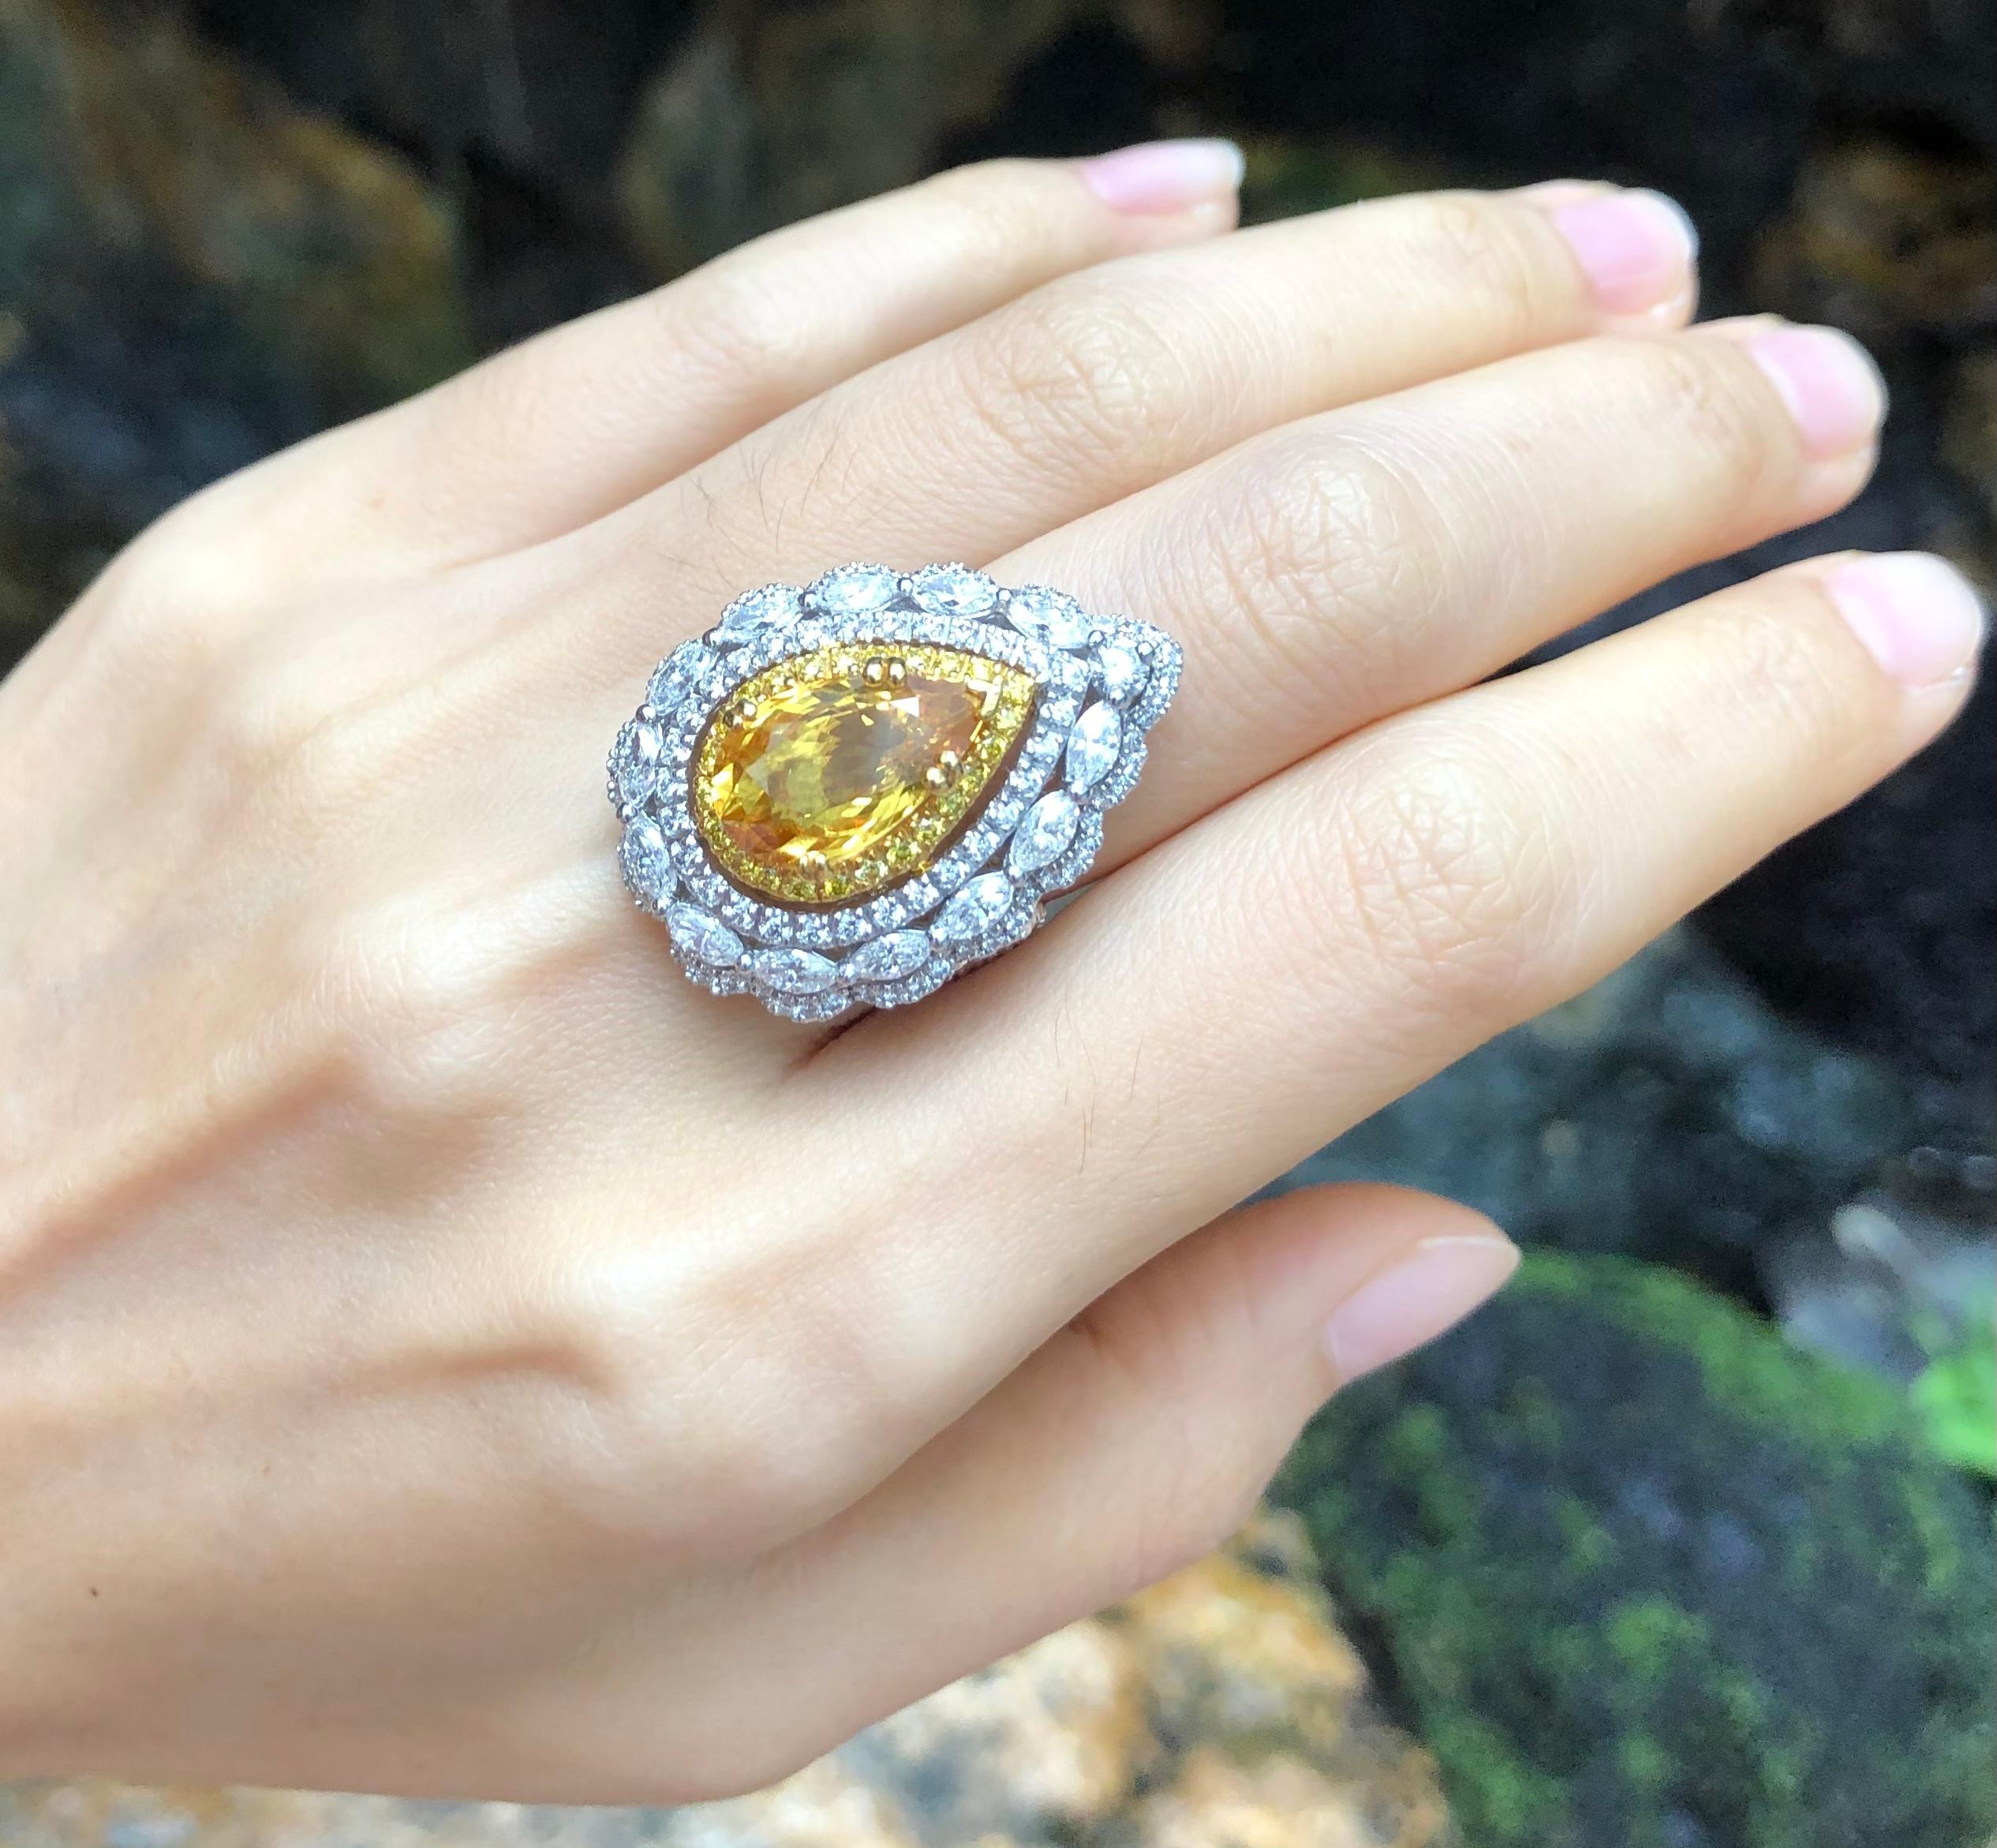 Yellow Sapphire 5.03 carats with Diamond 2.36 carats and Yellow Diamond 0.28 carats Ring set in 18 Karat White Gold Settings

Width:  2.1 cm 
Length:  2.9 cm
Ring Size: 49
Total Weight: 19.27 grams

